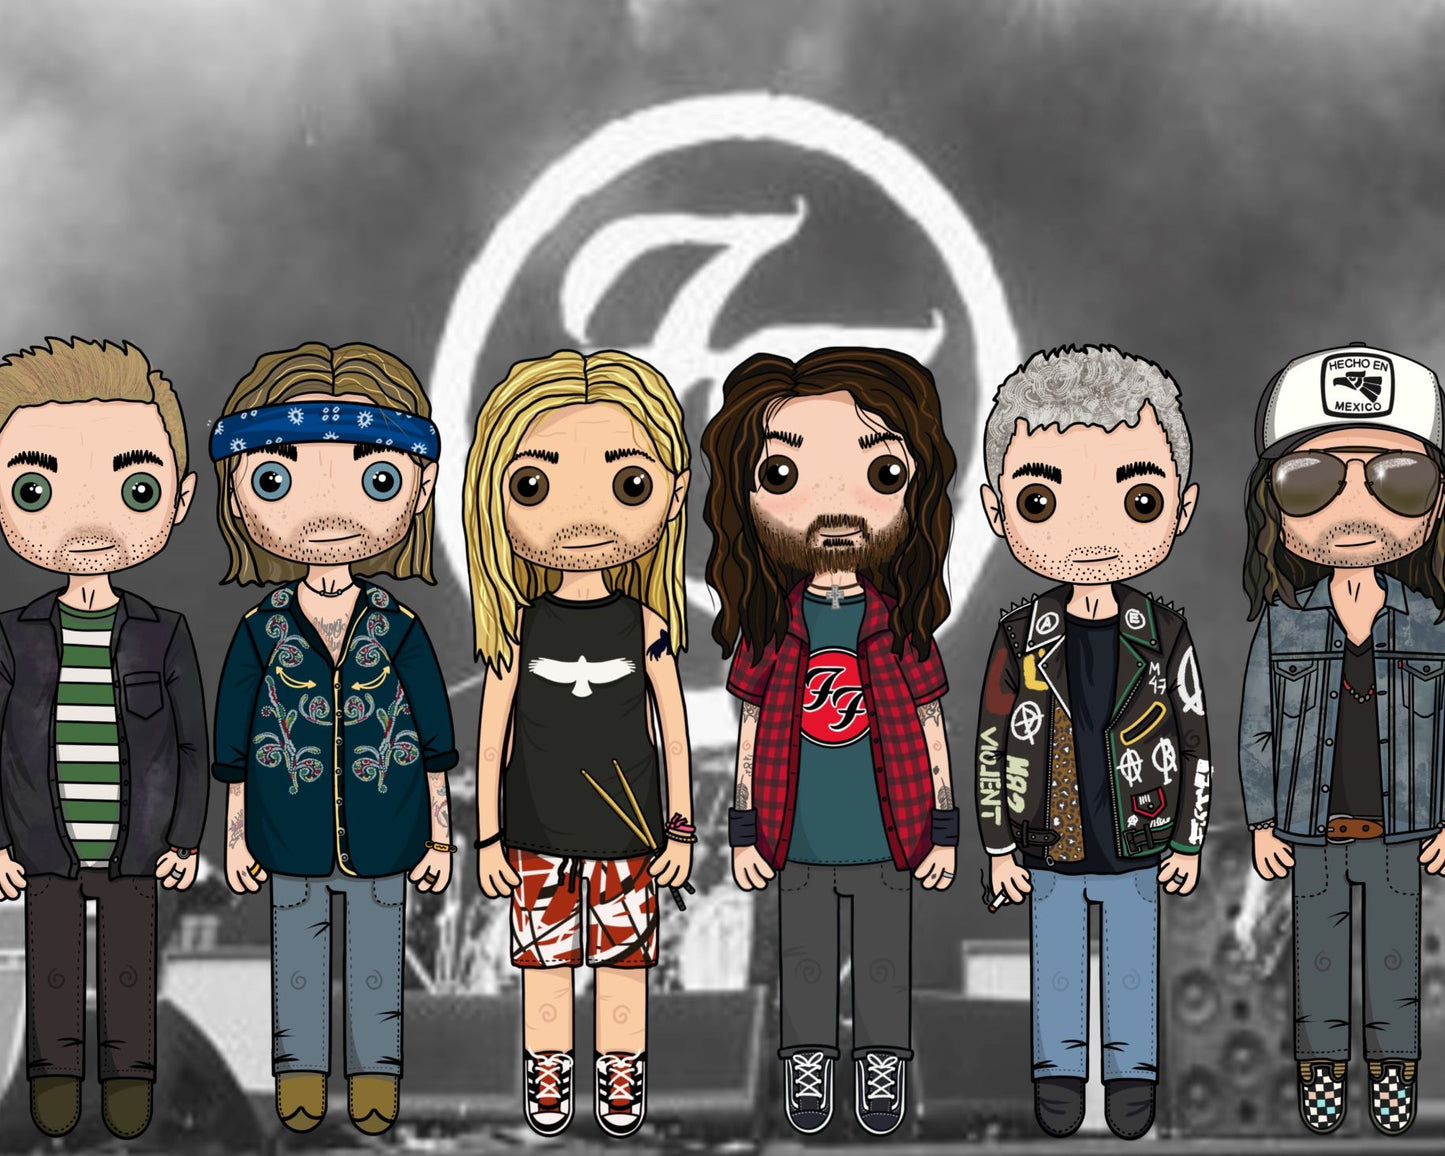 Foo Fighters Inspired Fabric Dolls